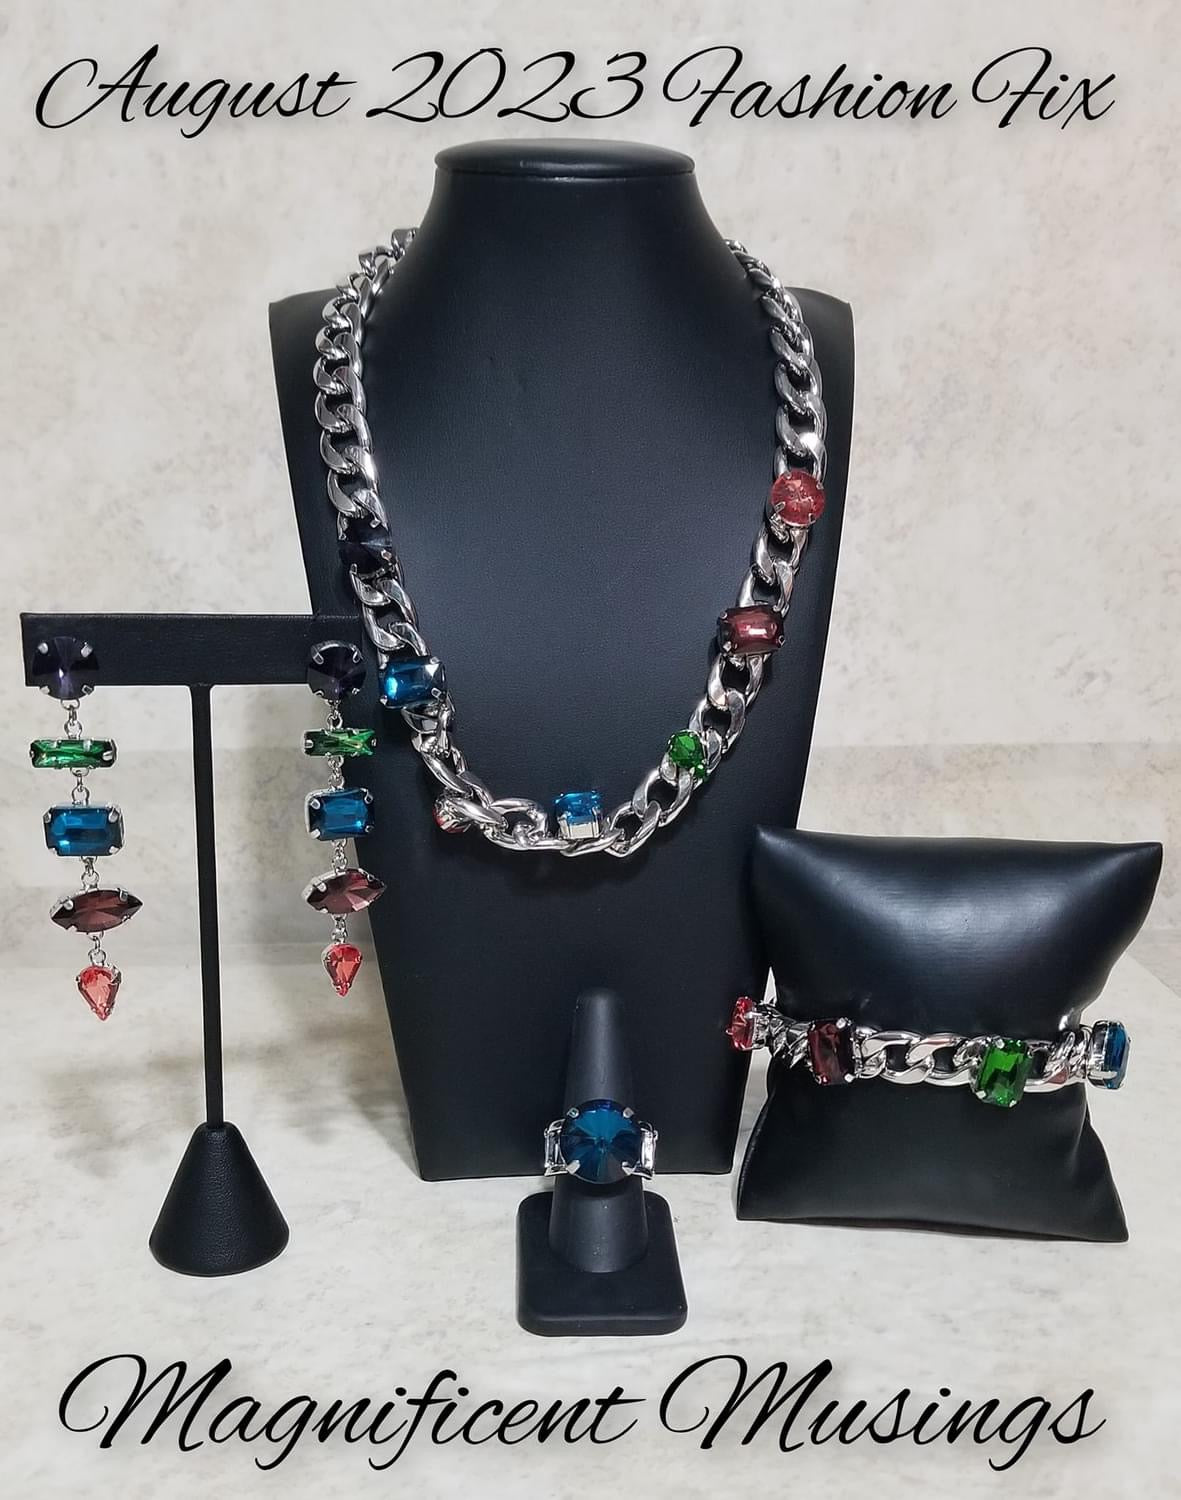 Paparazzi Accessories Magnificent Musings - Complete Trend Blend - August 2023 The Magnificent Musings Collection features bold statement pieces and edgy designs. Reveling in sassy, unapologetic fashion, Magnificent Musings mavens confidently express them